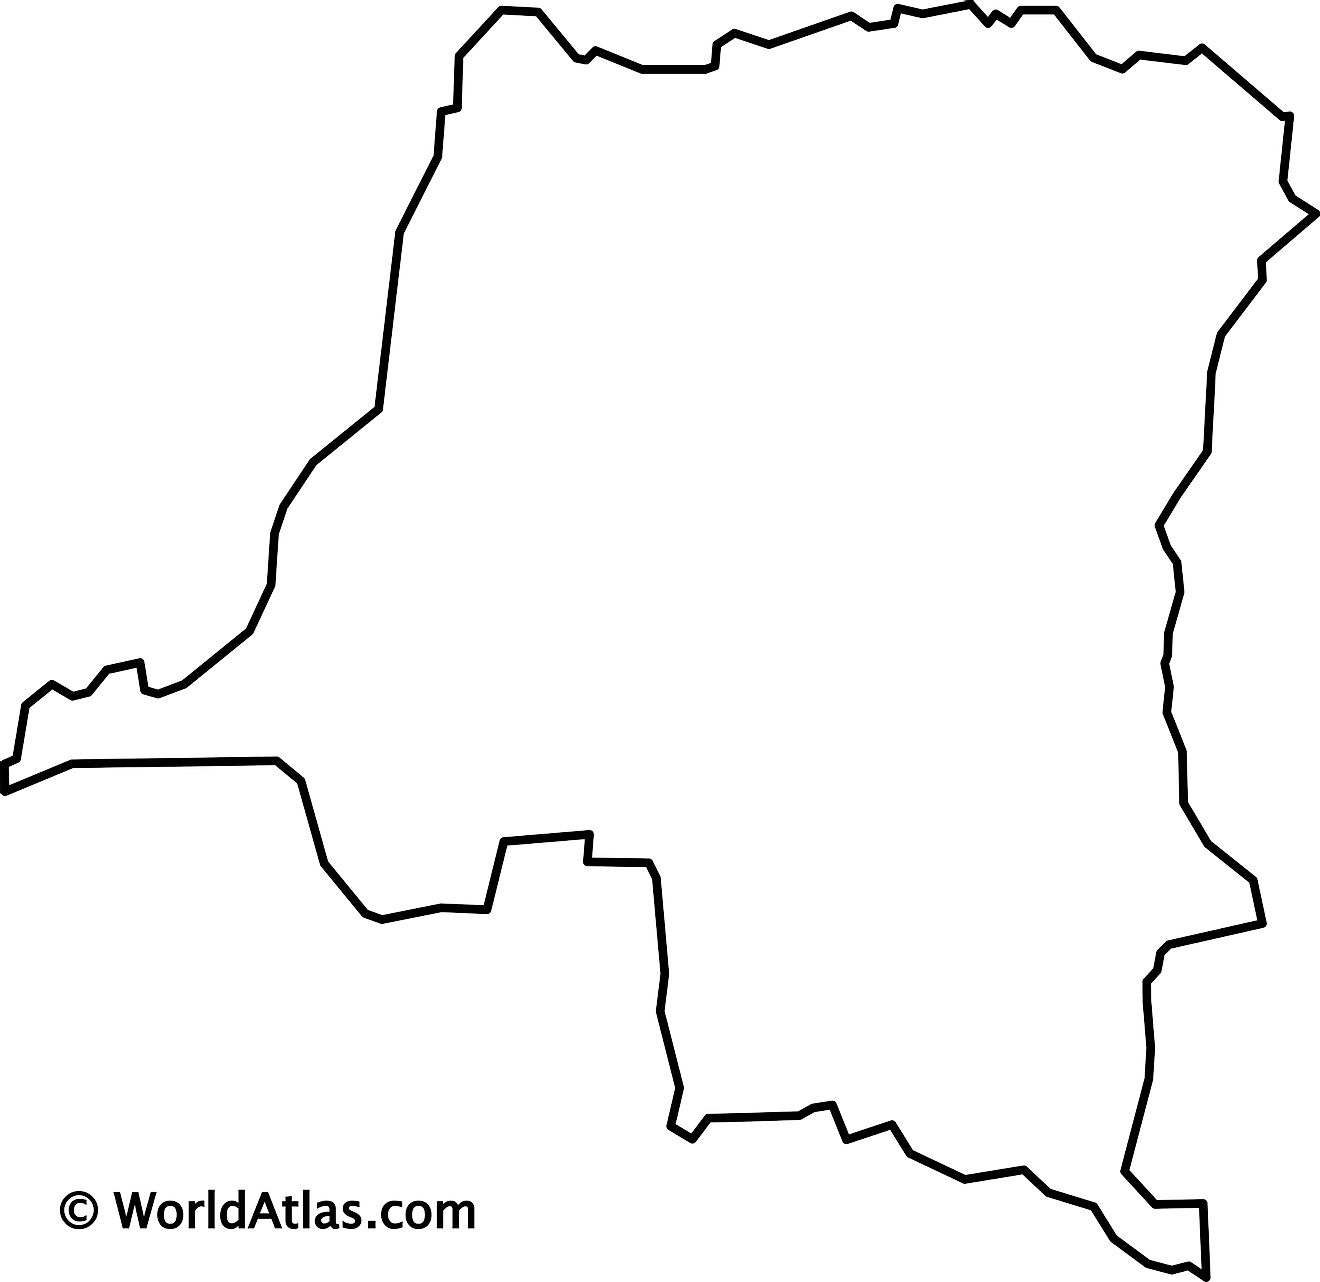 Blank outline map of the Democratic Republic of Congo